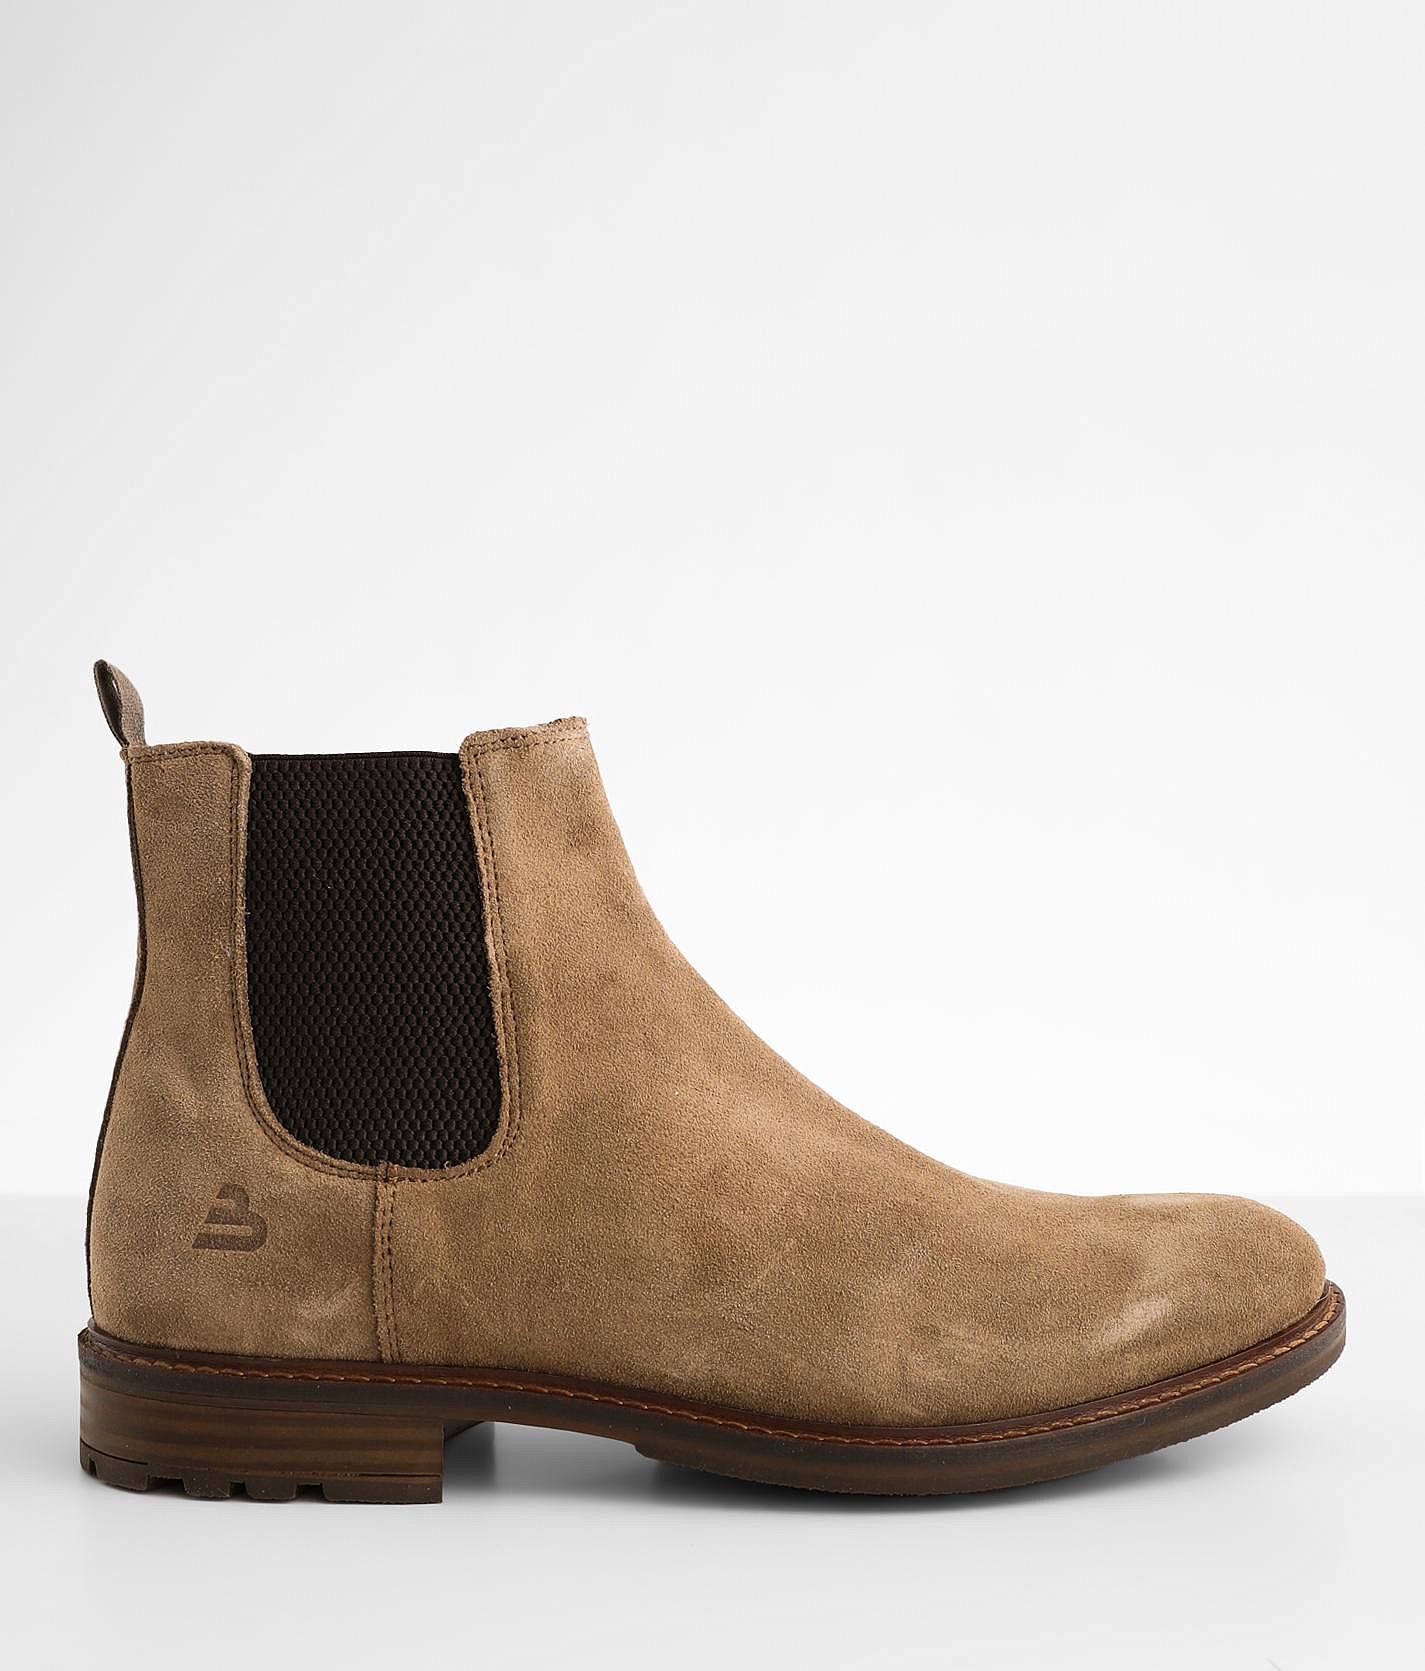 Bullboxer Easton Suede Chelsea Boot - Men's Shoes in Taupe | Buckle